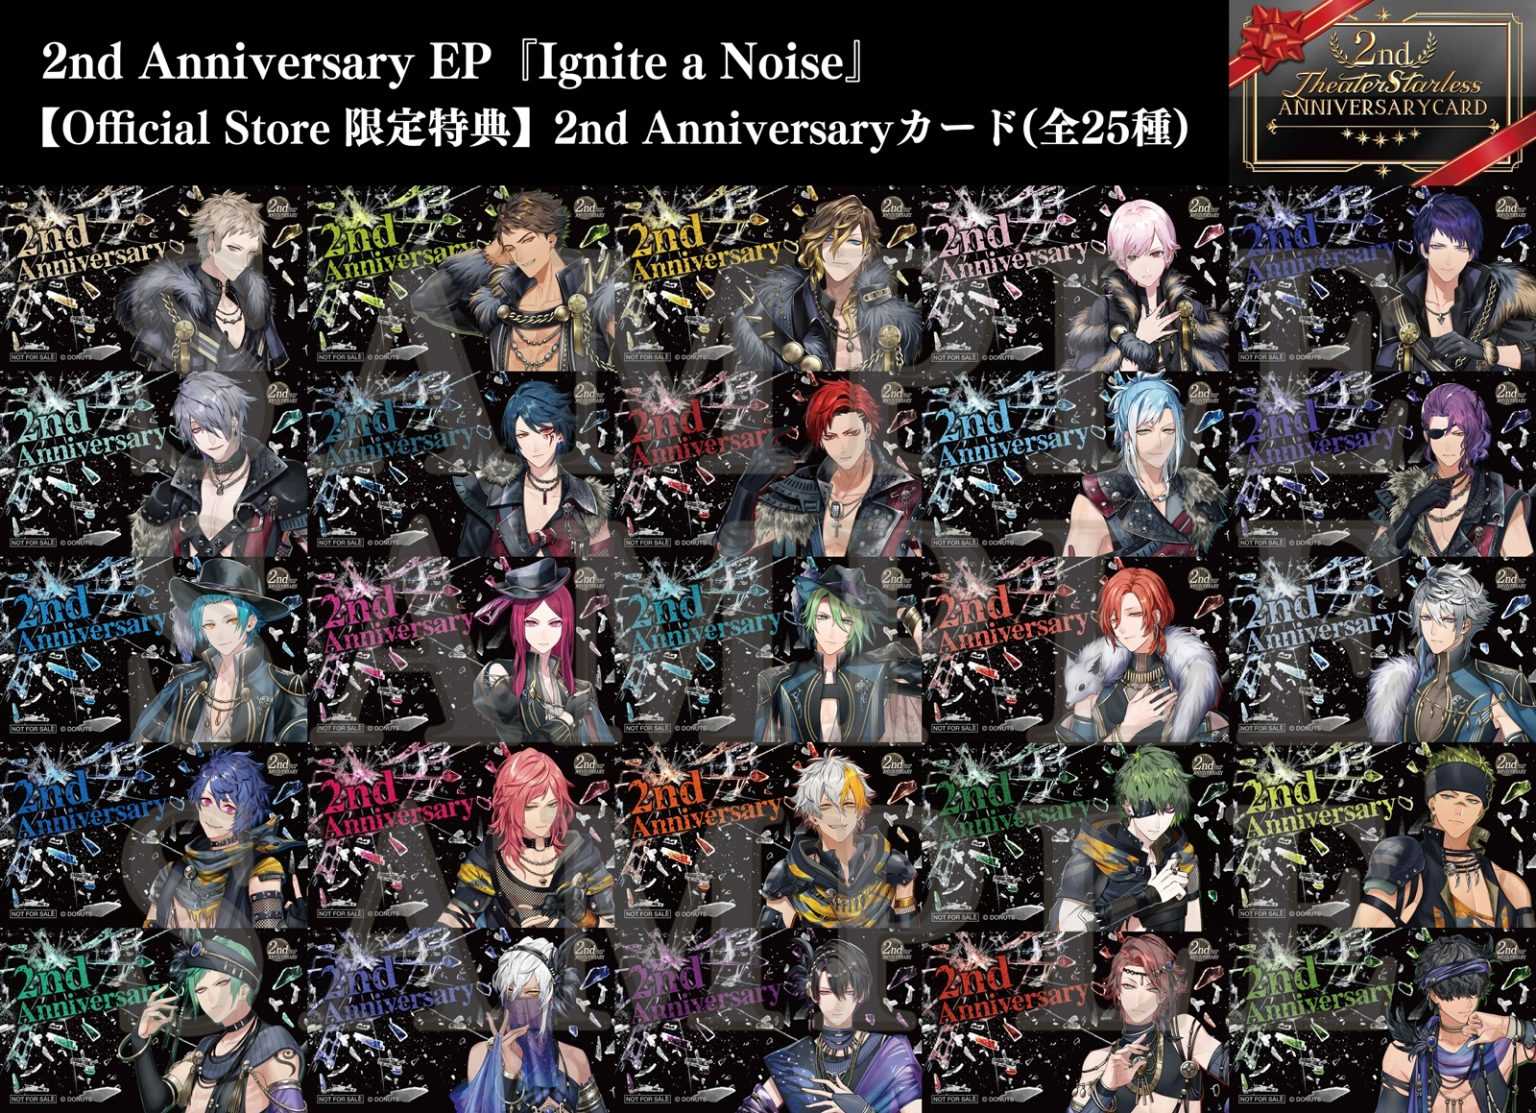 2nd Anniversary EP『Ignite a Noise』 発売決定！ – ワルメン応援